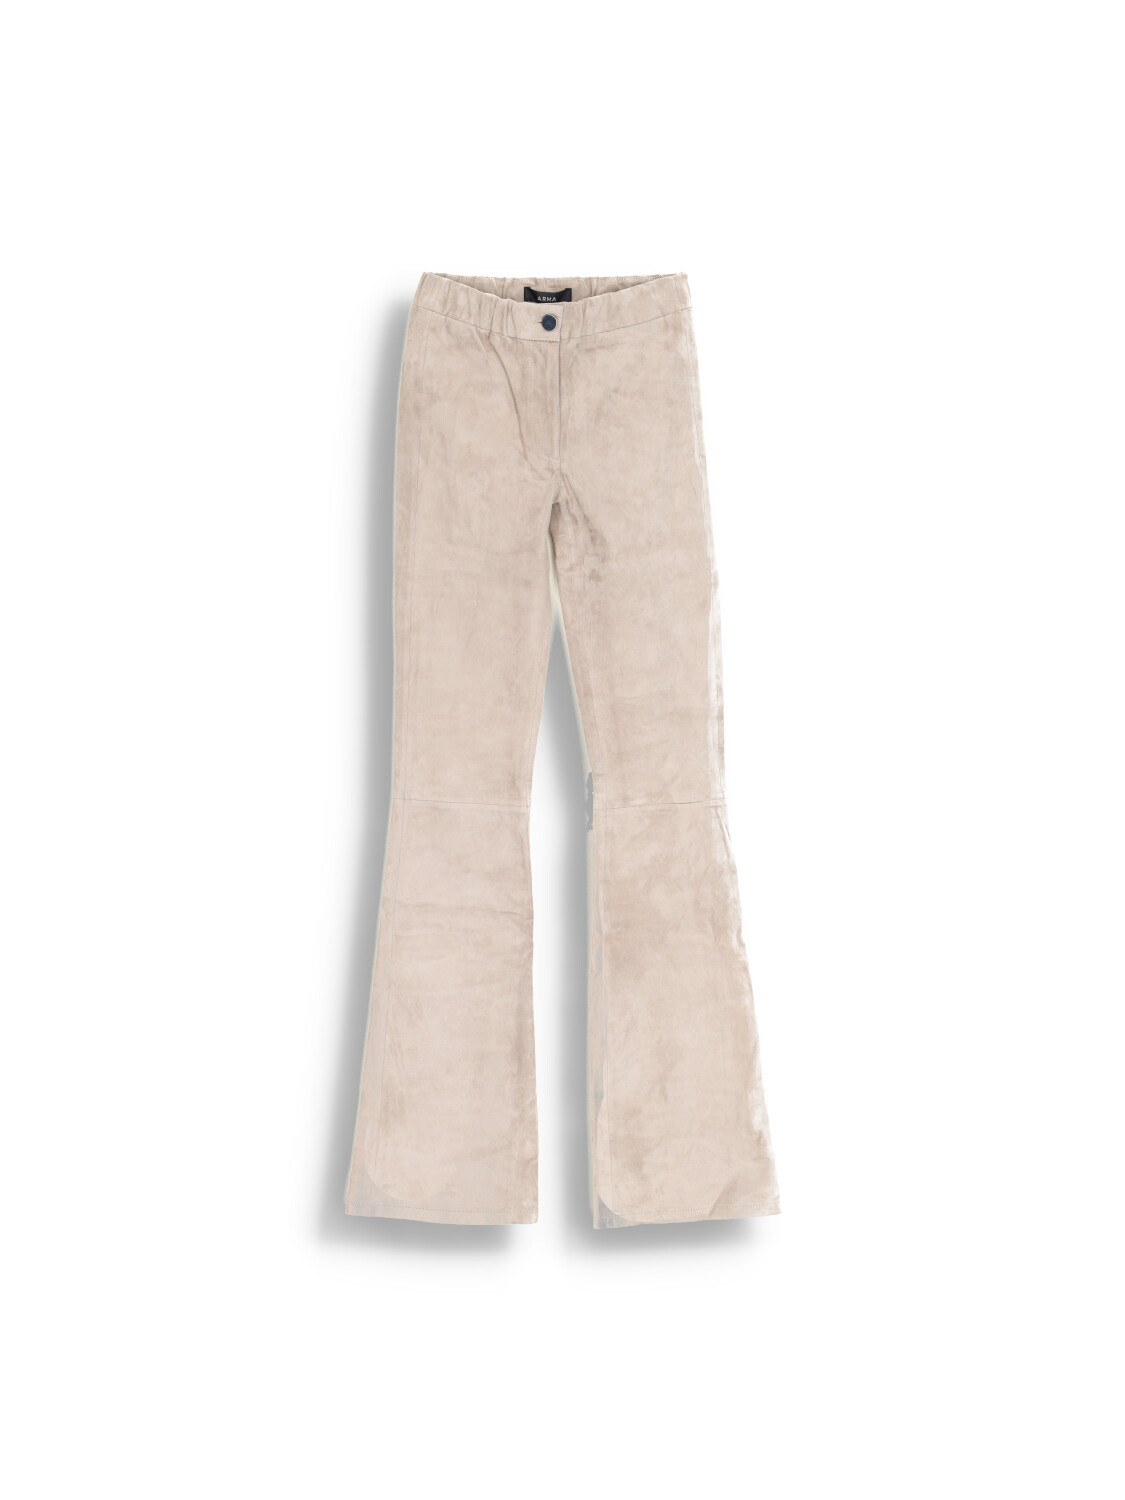 Izzy - Pants with elastic waistband in lamb leather